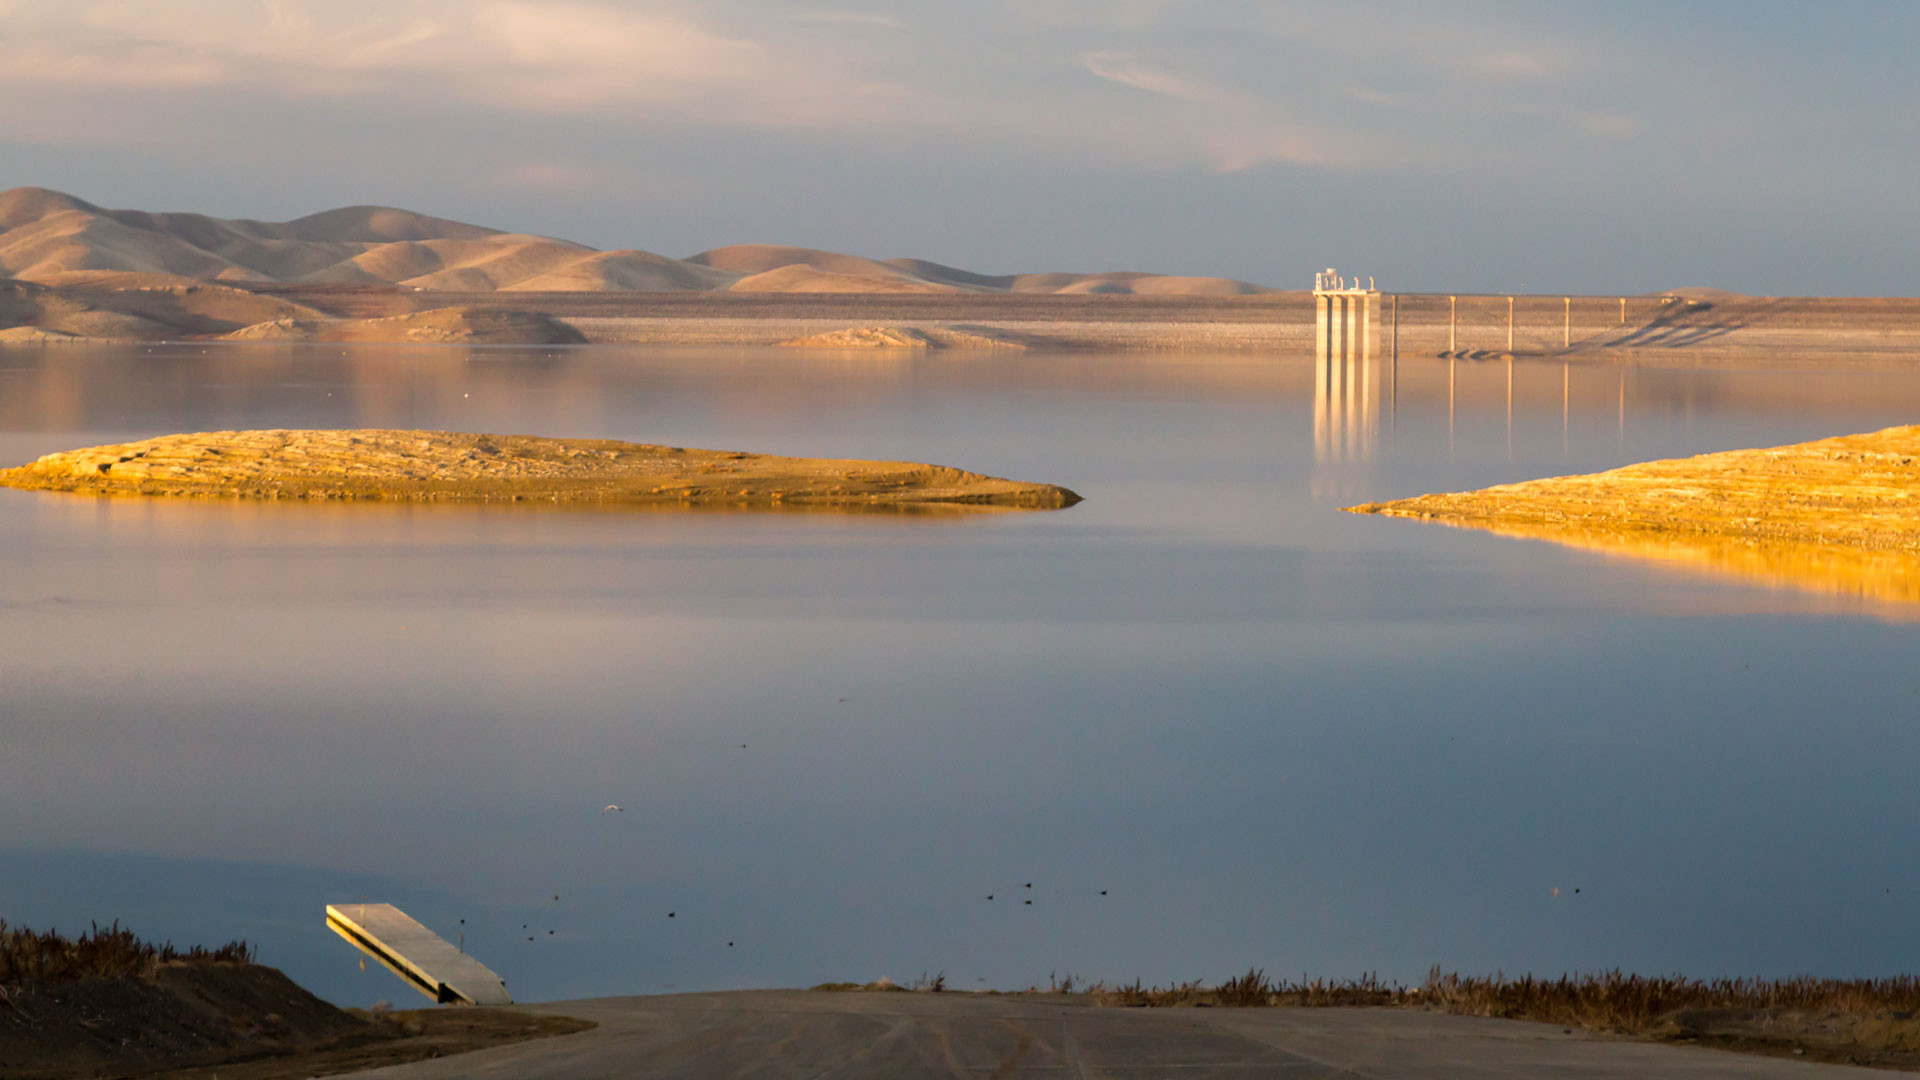 San Luis Reservoir, which serves the Central Valley and Bay Area, is filled entirely by water from the Delta pumping plants.